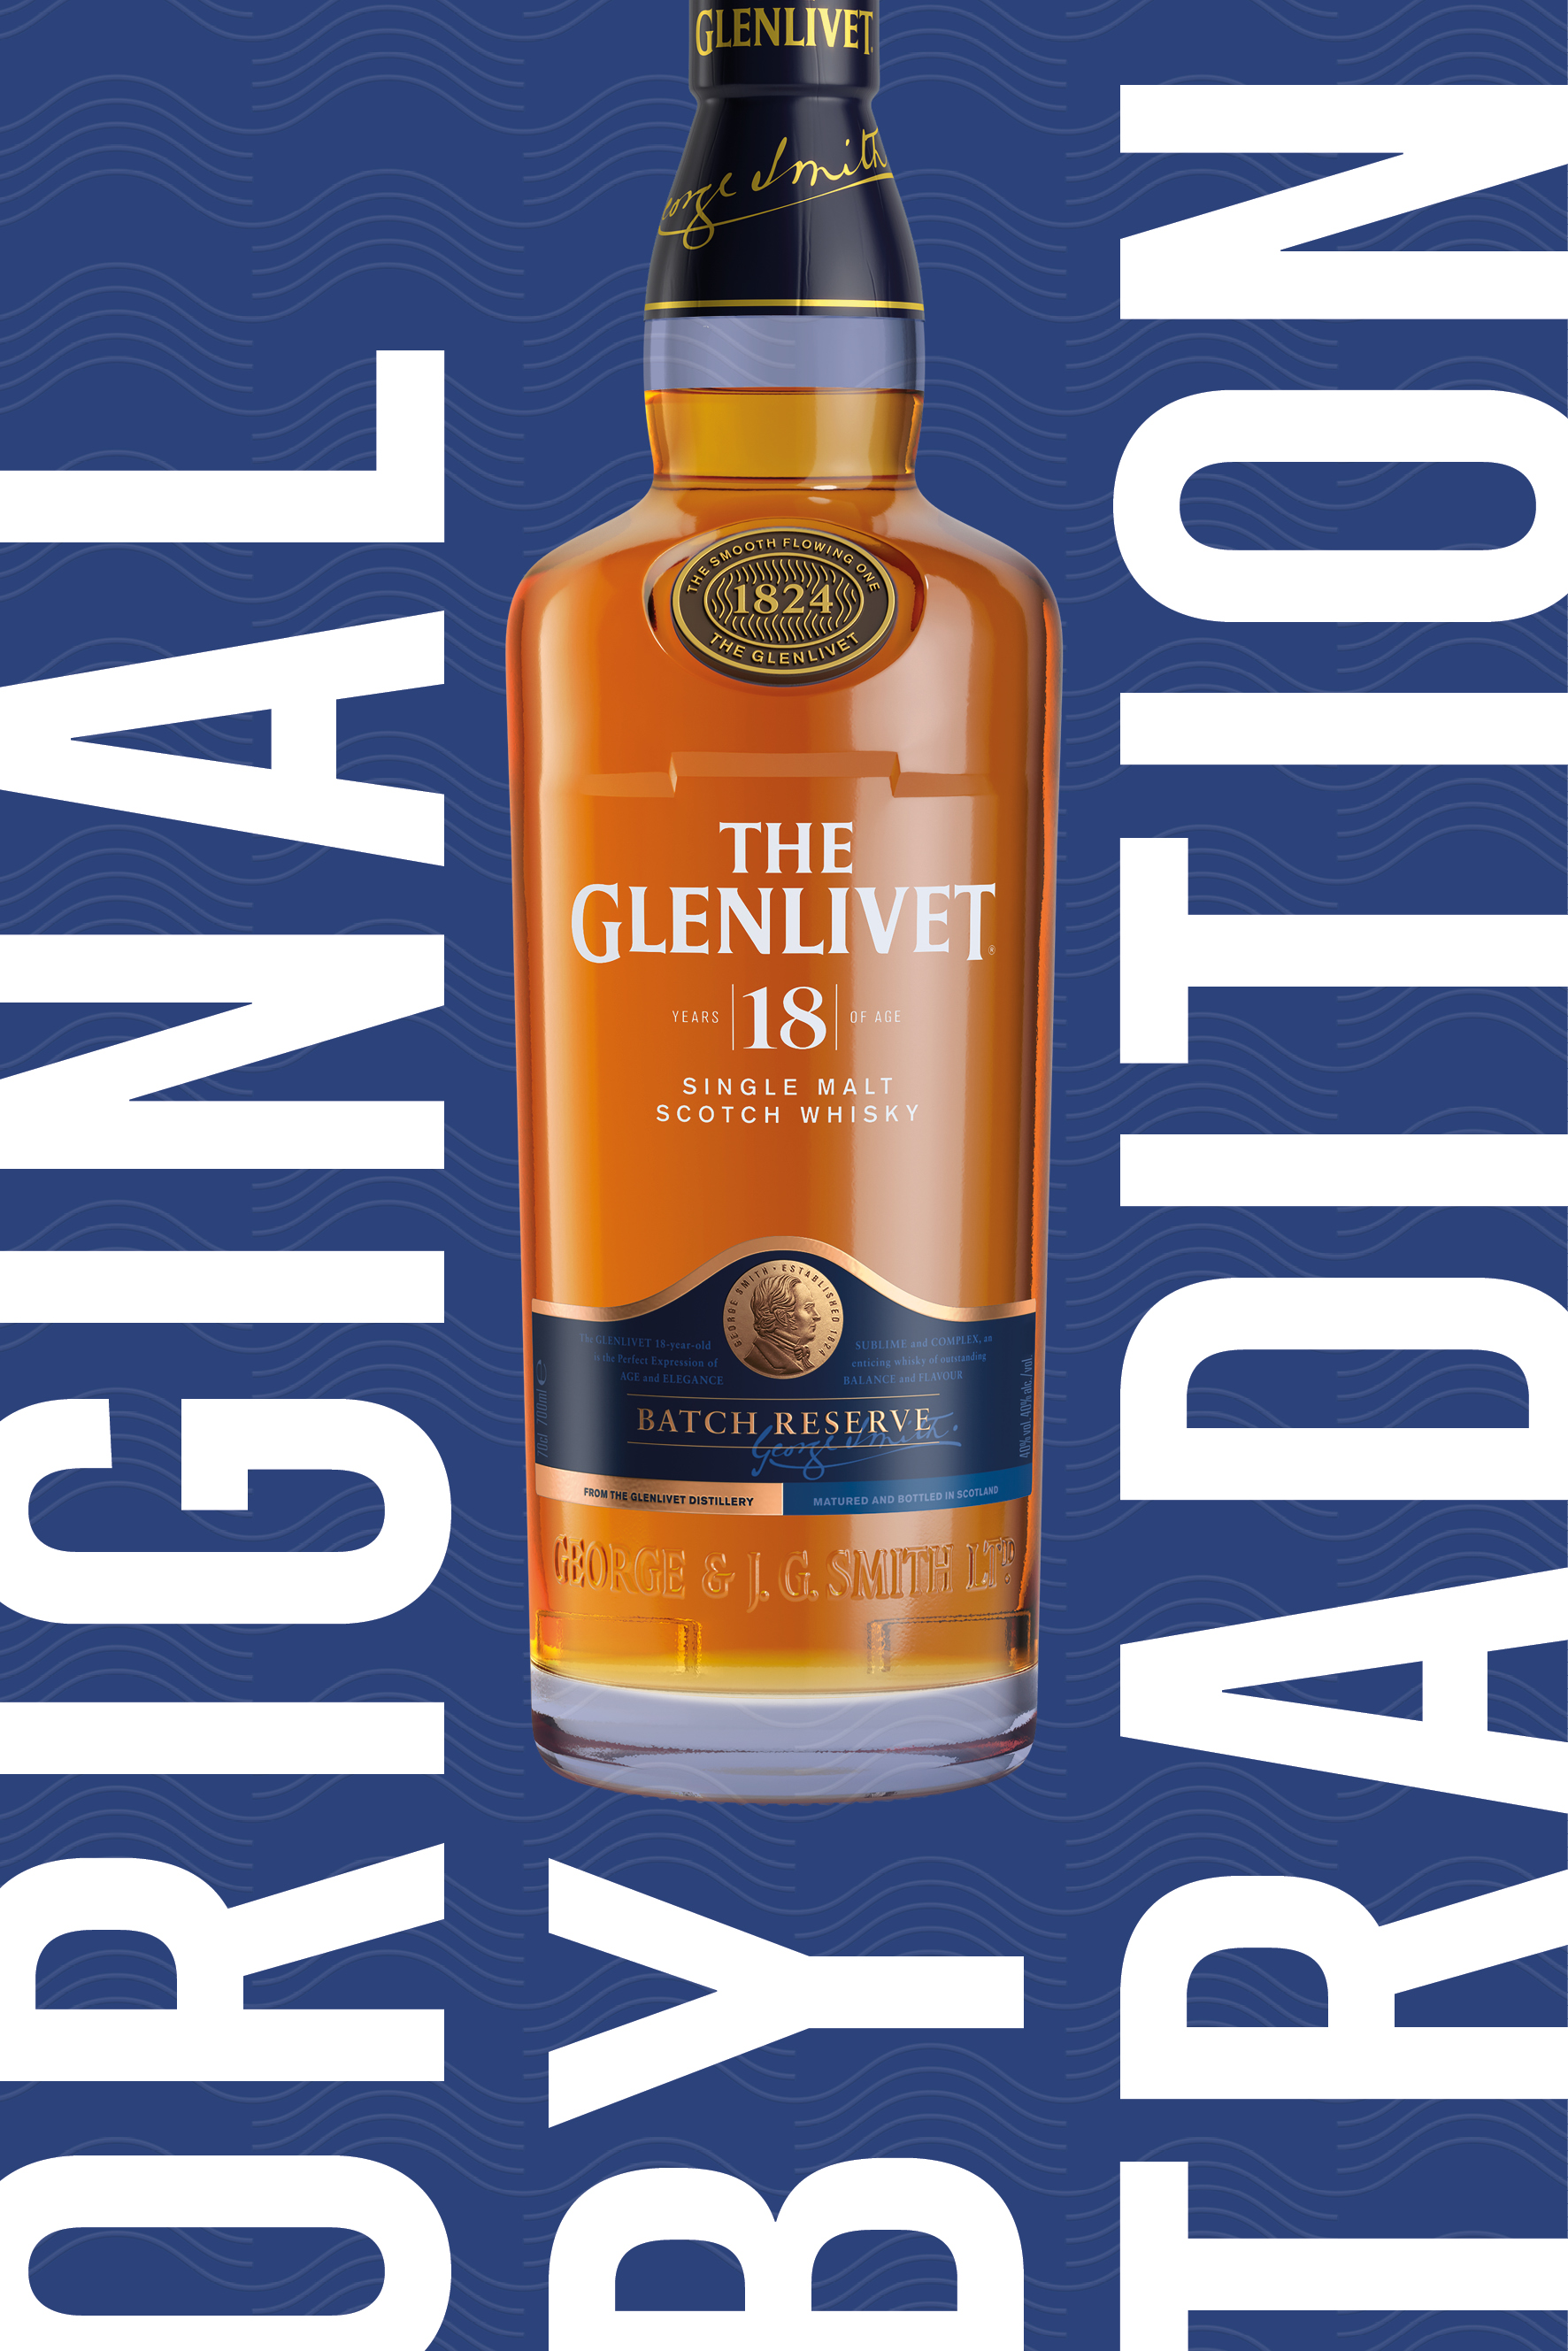 Bottle of The Glenlivet 18yo on blue background for "Original by Tradition" campaign by CPB London